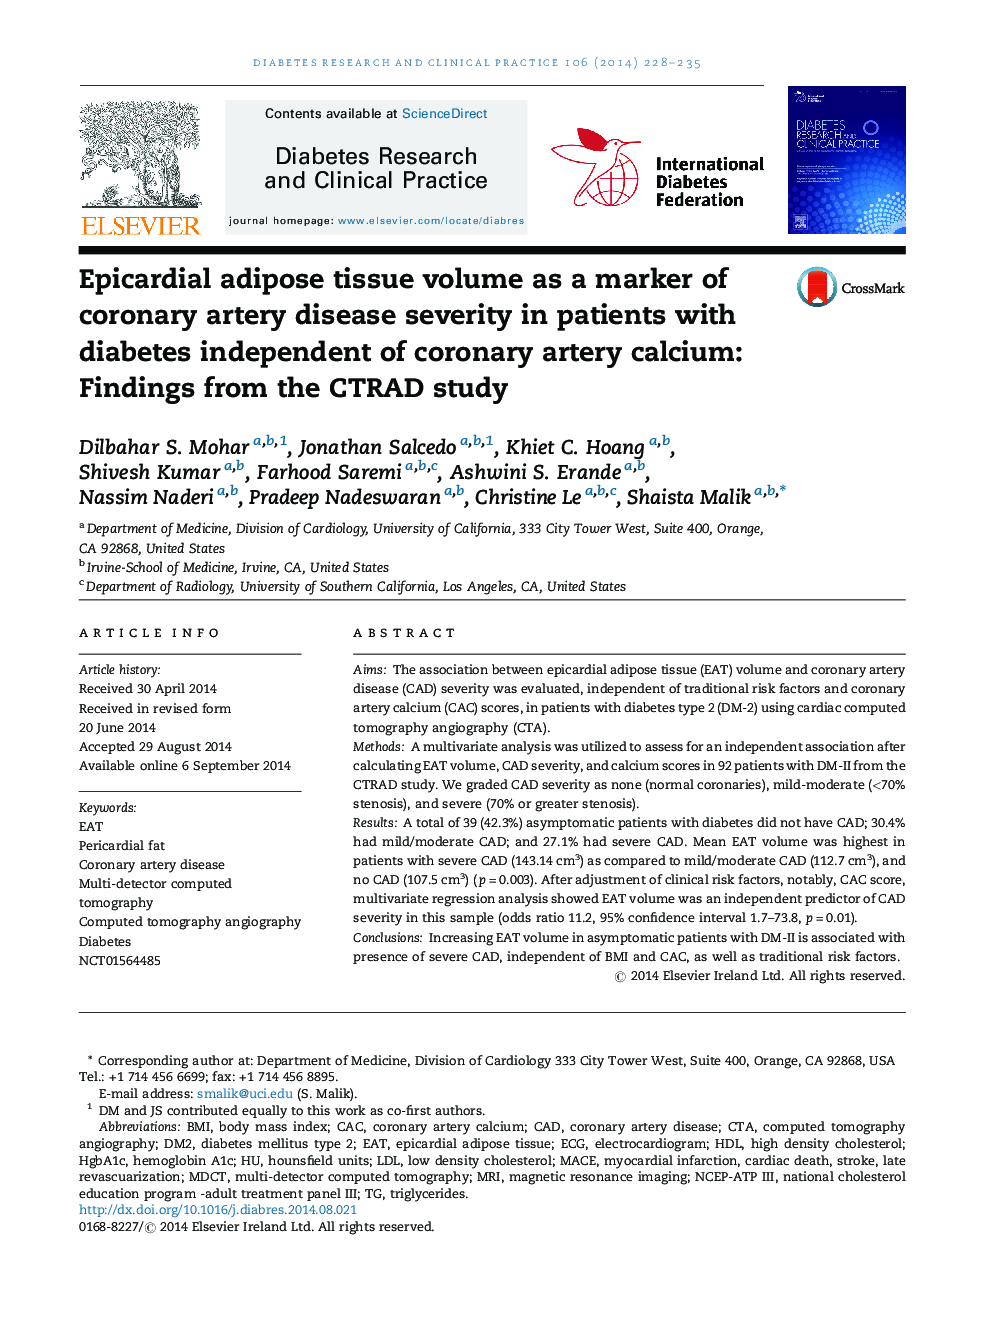 Epicardial adipose tissue volume as a marker of coronary artery disease severity in patients with diabetes independent of coronary artery calcium: Findings from the CTRAD study